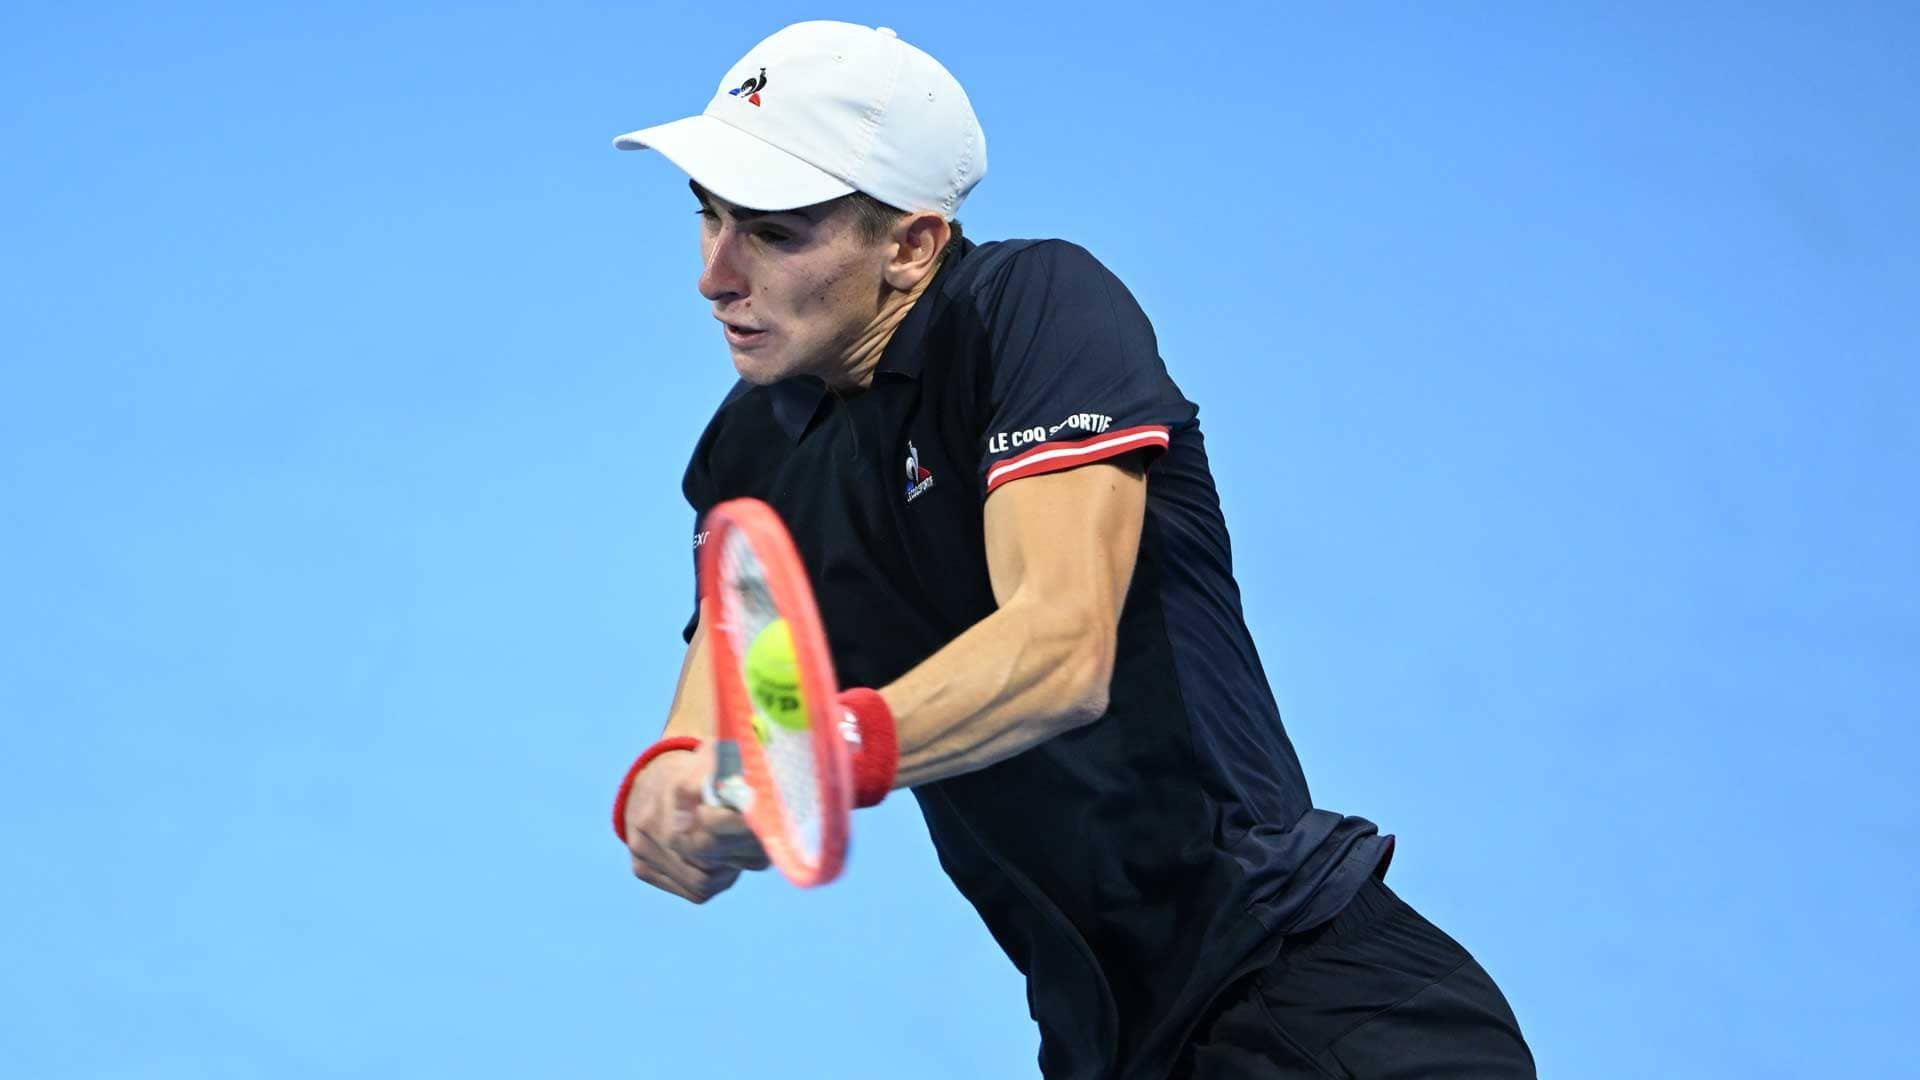 Matteo Arnaldi advances to the second round of qualifying at the Australian Open with a victory against Switzerland's Alexander Ritschard.